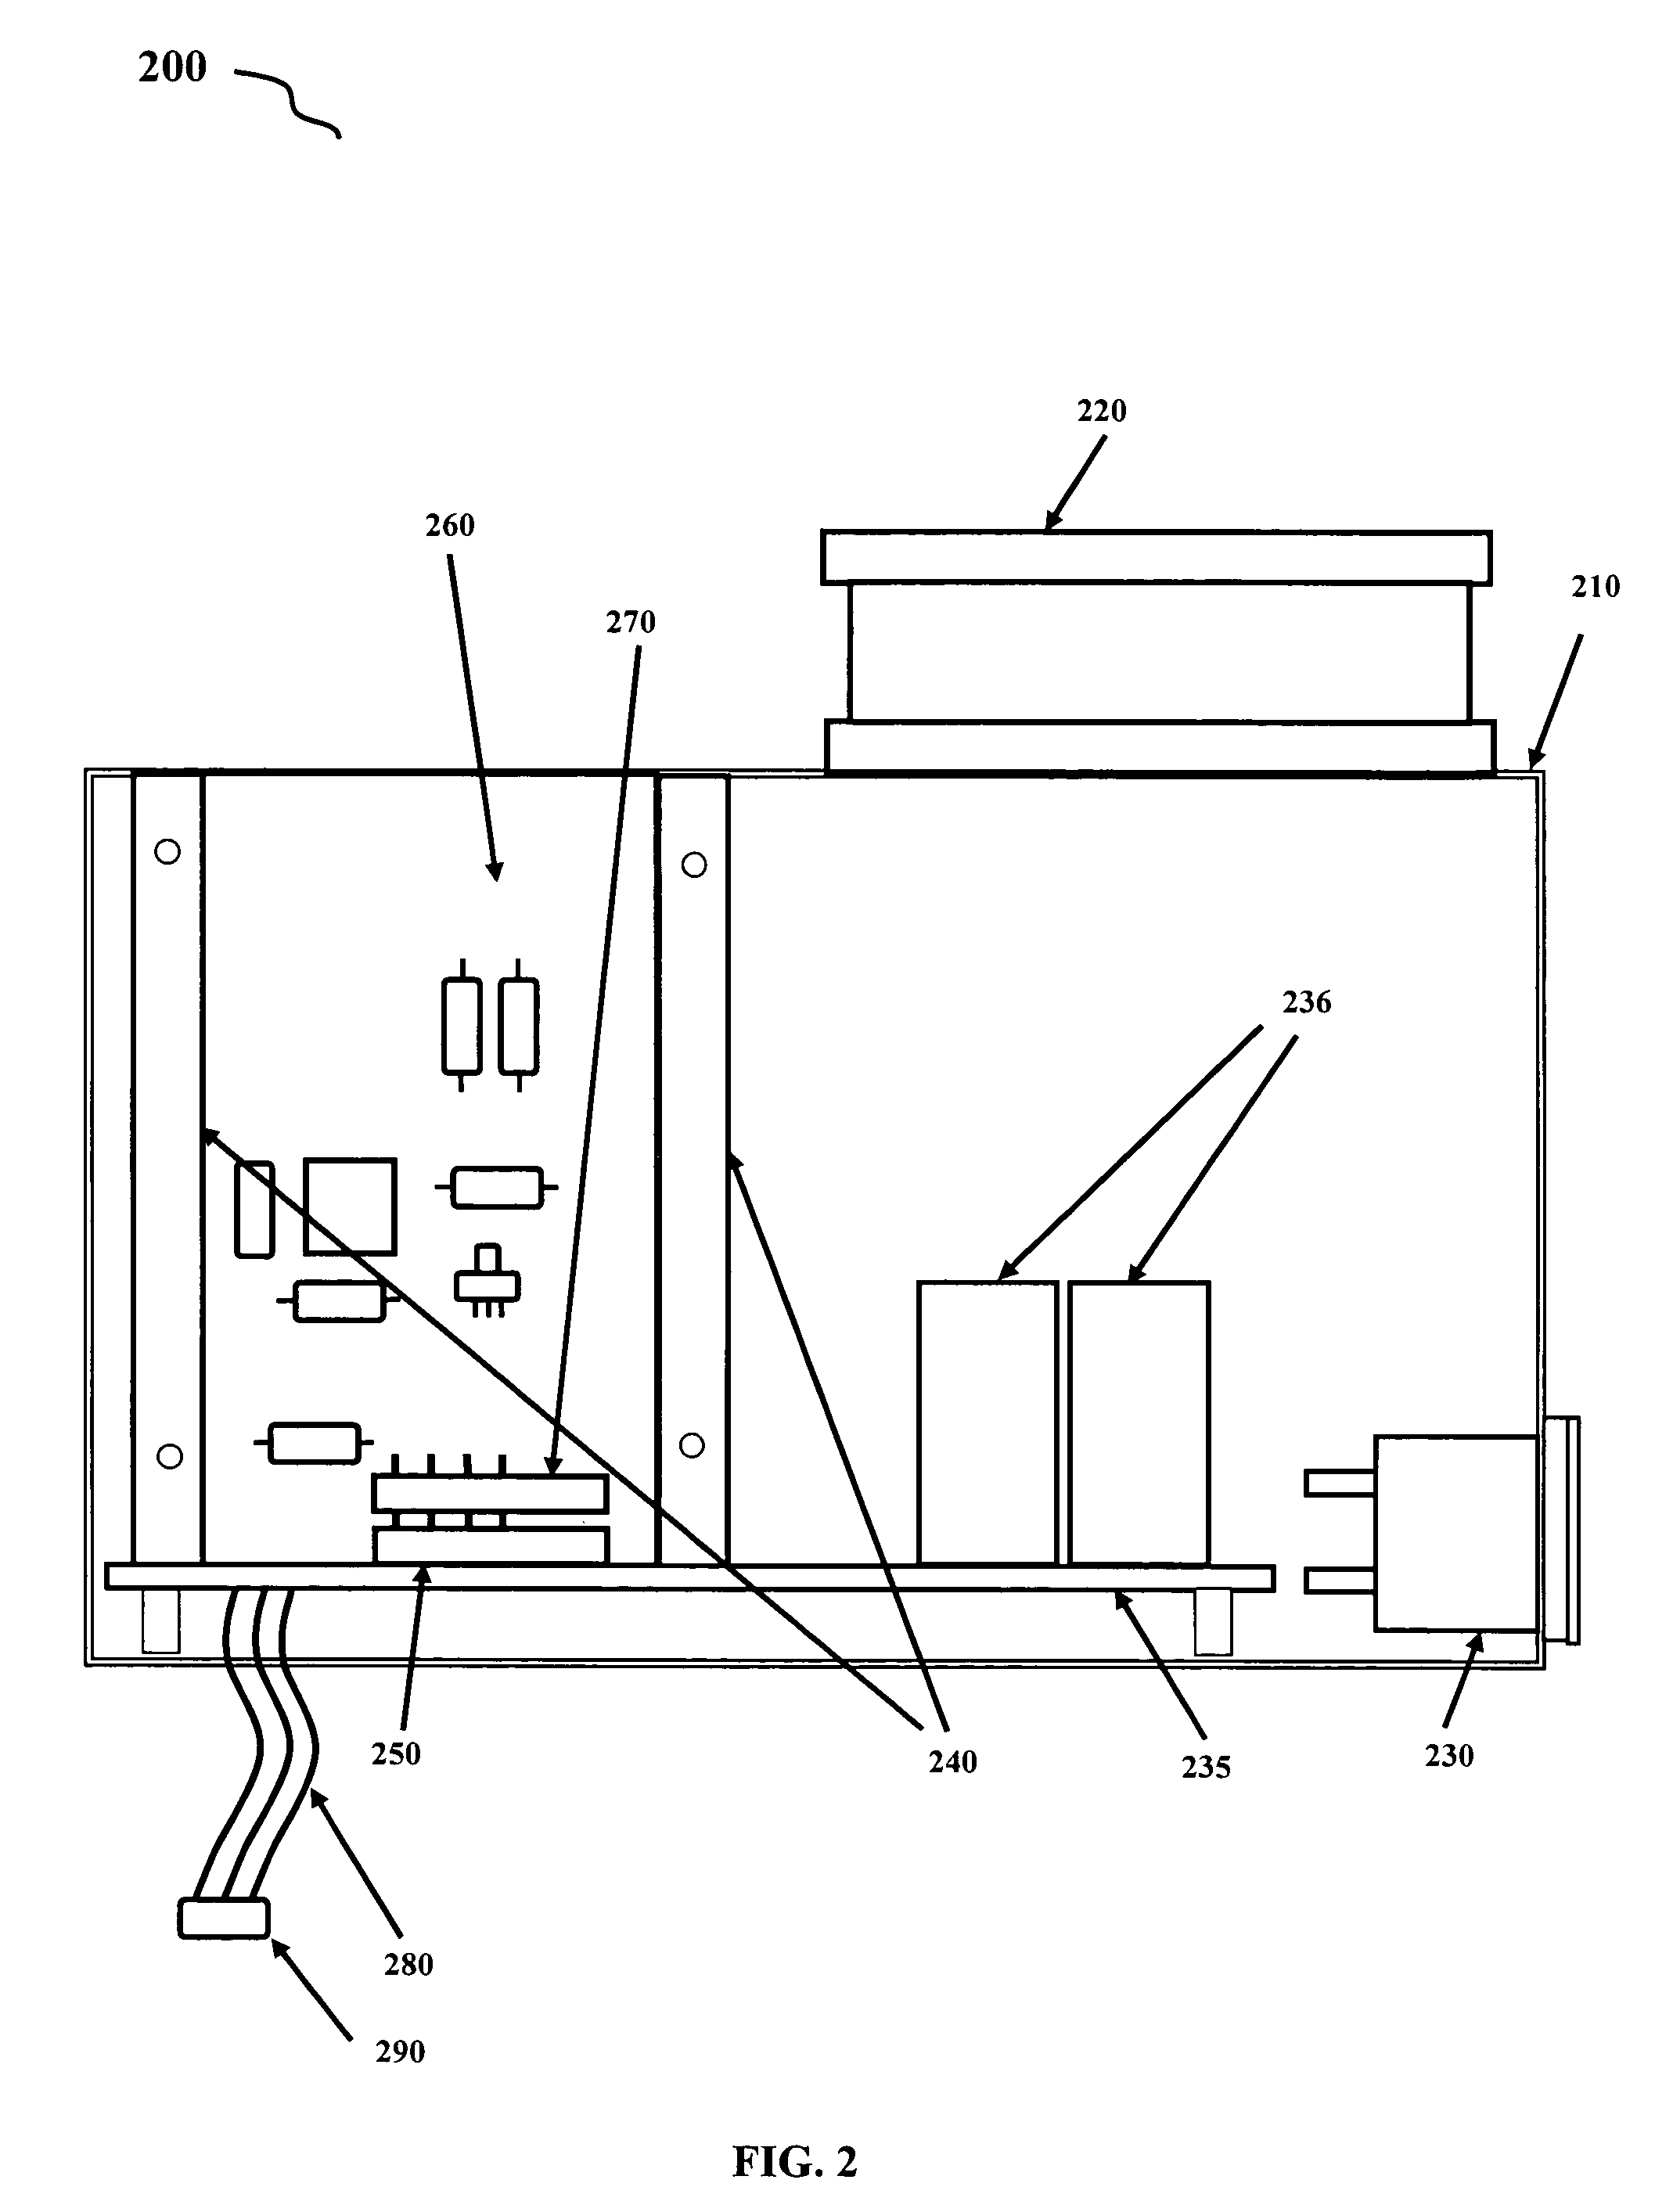 Modulated data transfer between a system and its power supply